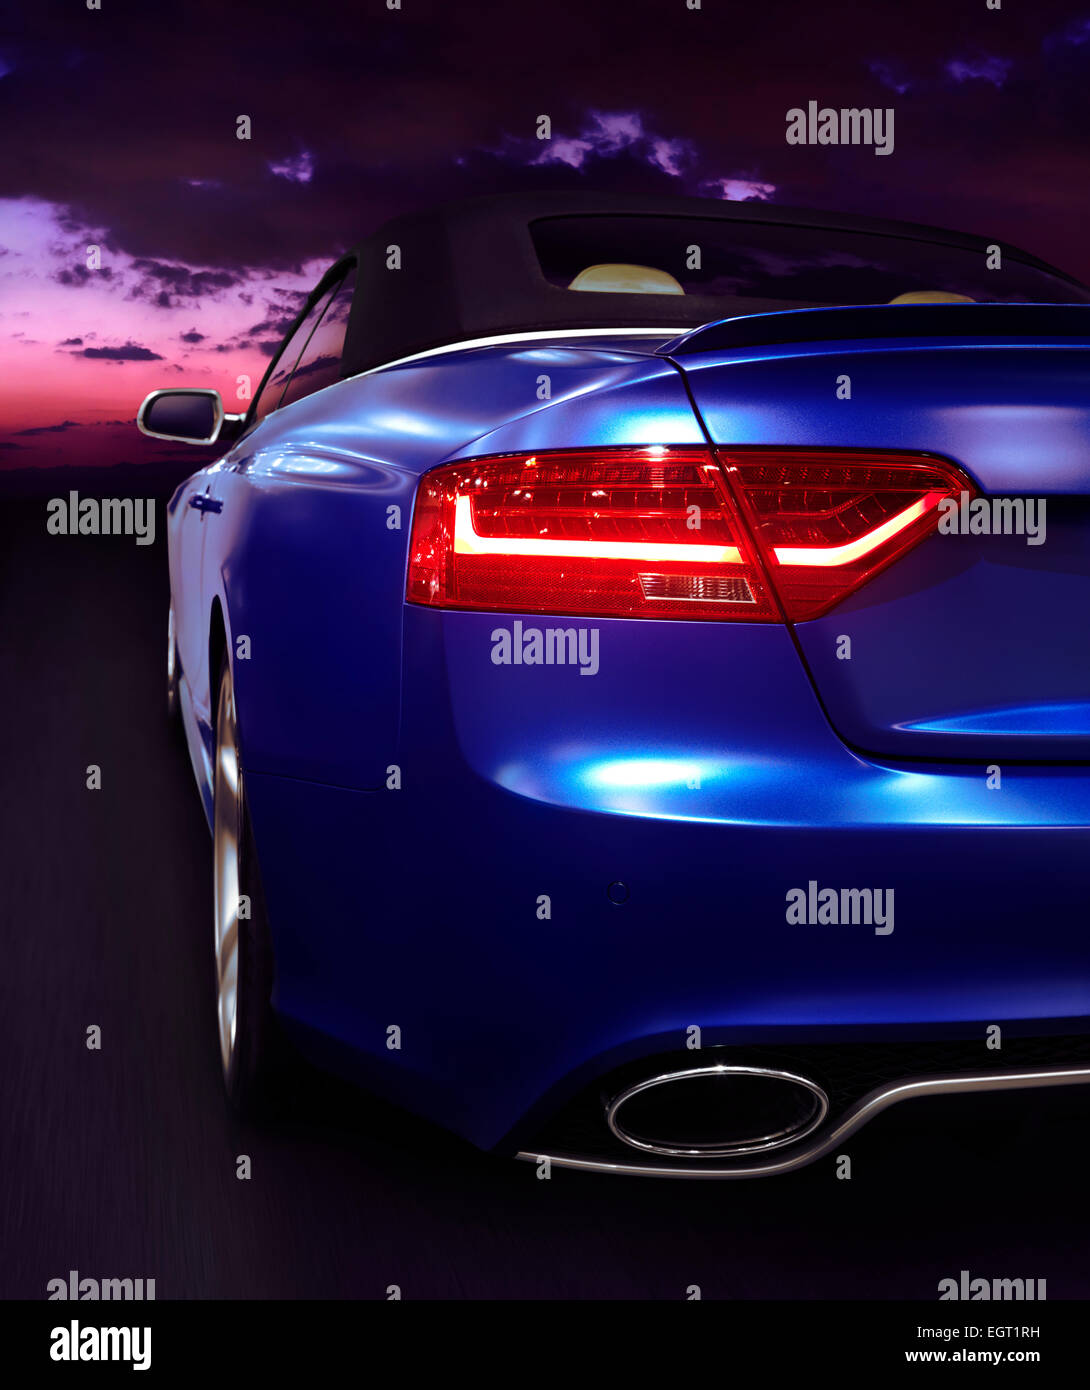 Closeup of a taillight on the back of a blue car on a highway at sunset. 2015 Audi RS 5 cabriolet. Stock Photo